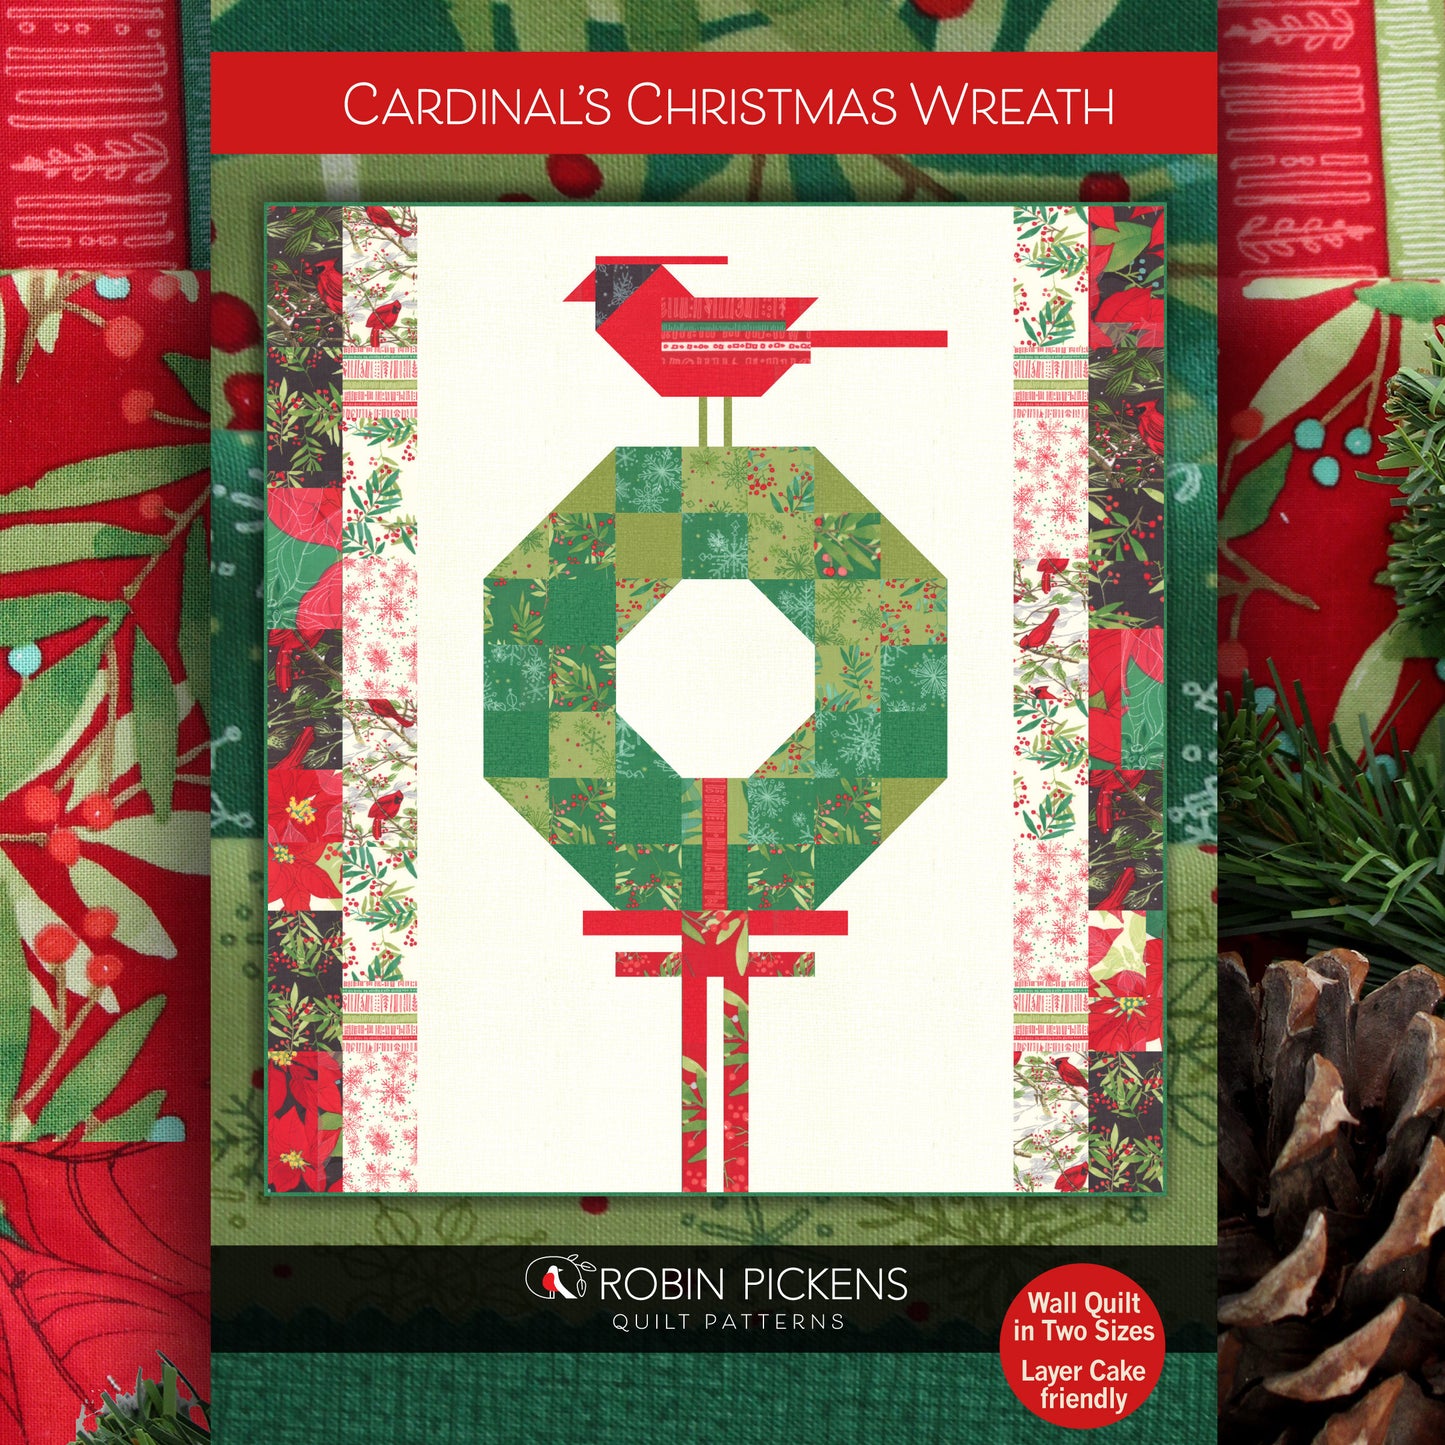 CARDINALS CHRISTMAS WREATH Printed Quilt Pattern in Large or Medium Wall Sizes by Robin Pickens